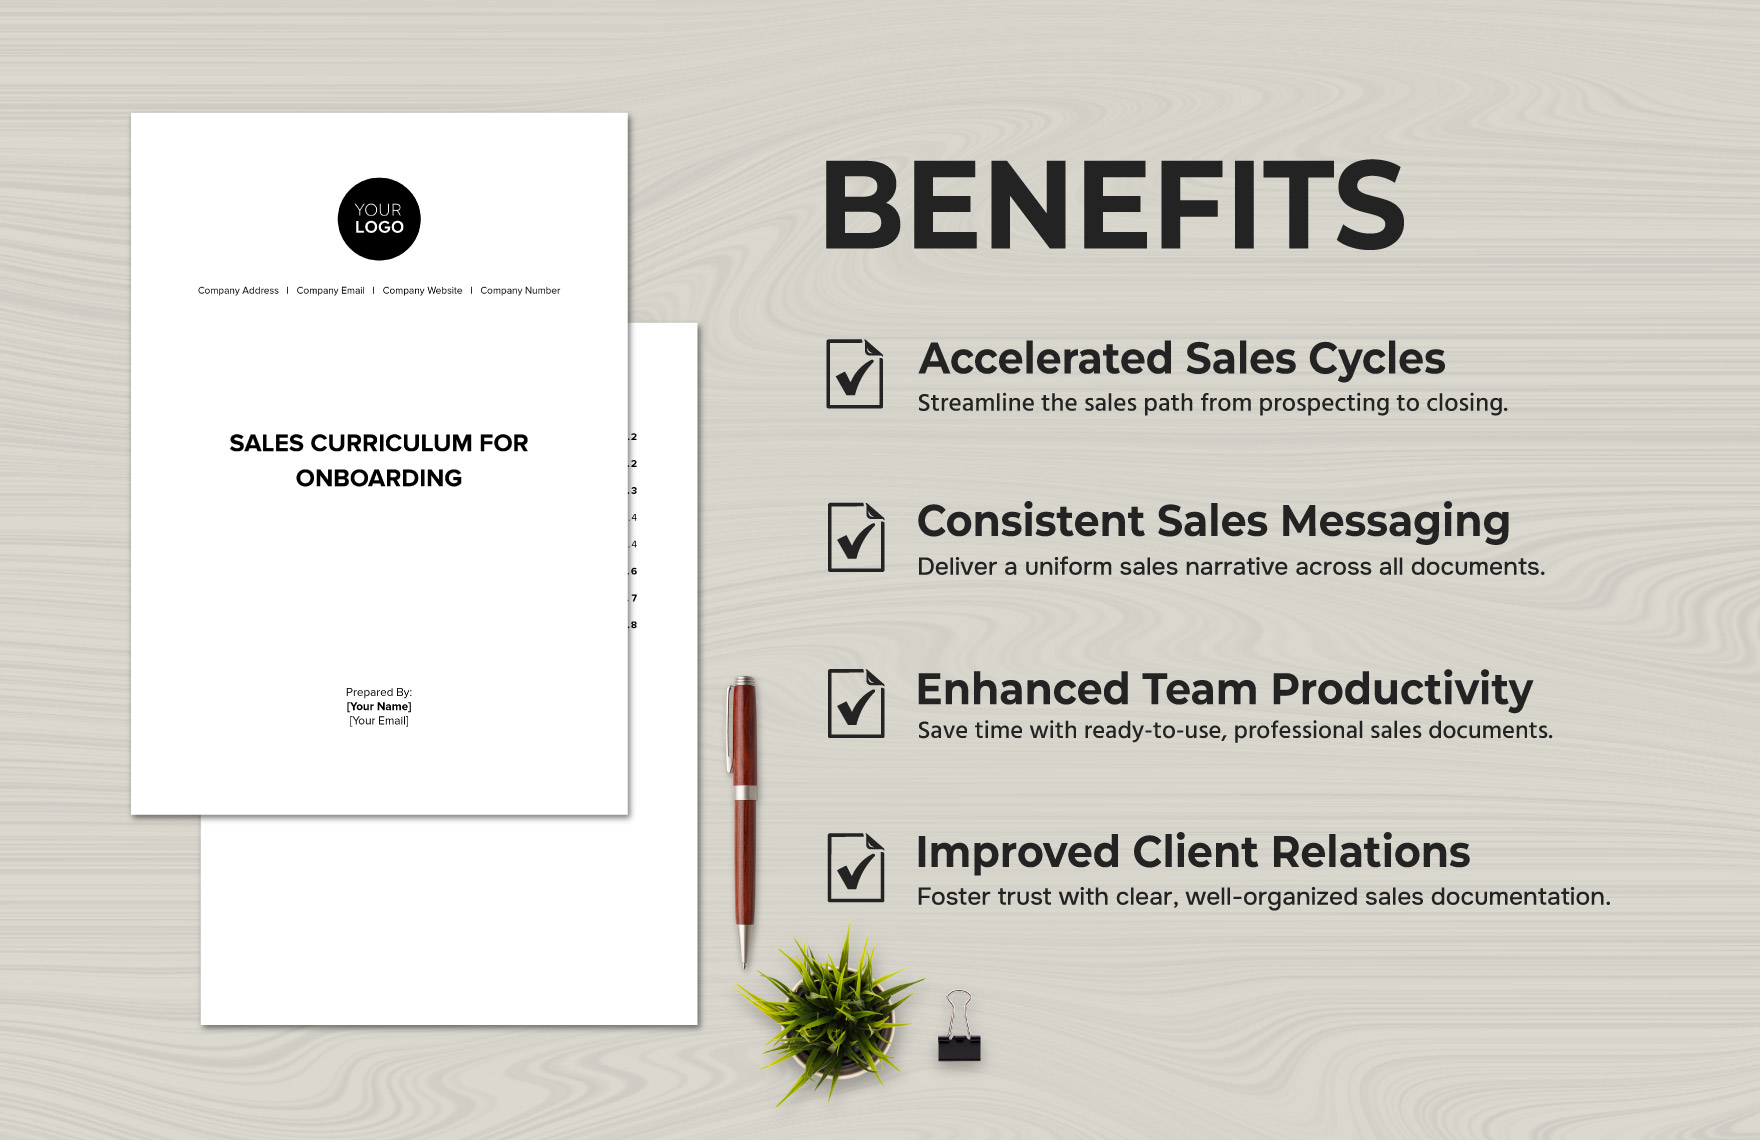 Sales Curriculum for Onboarding Template